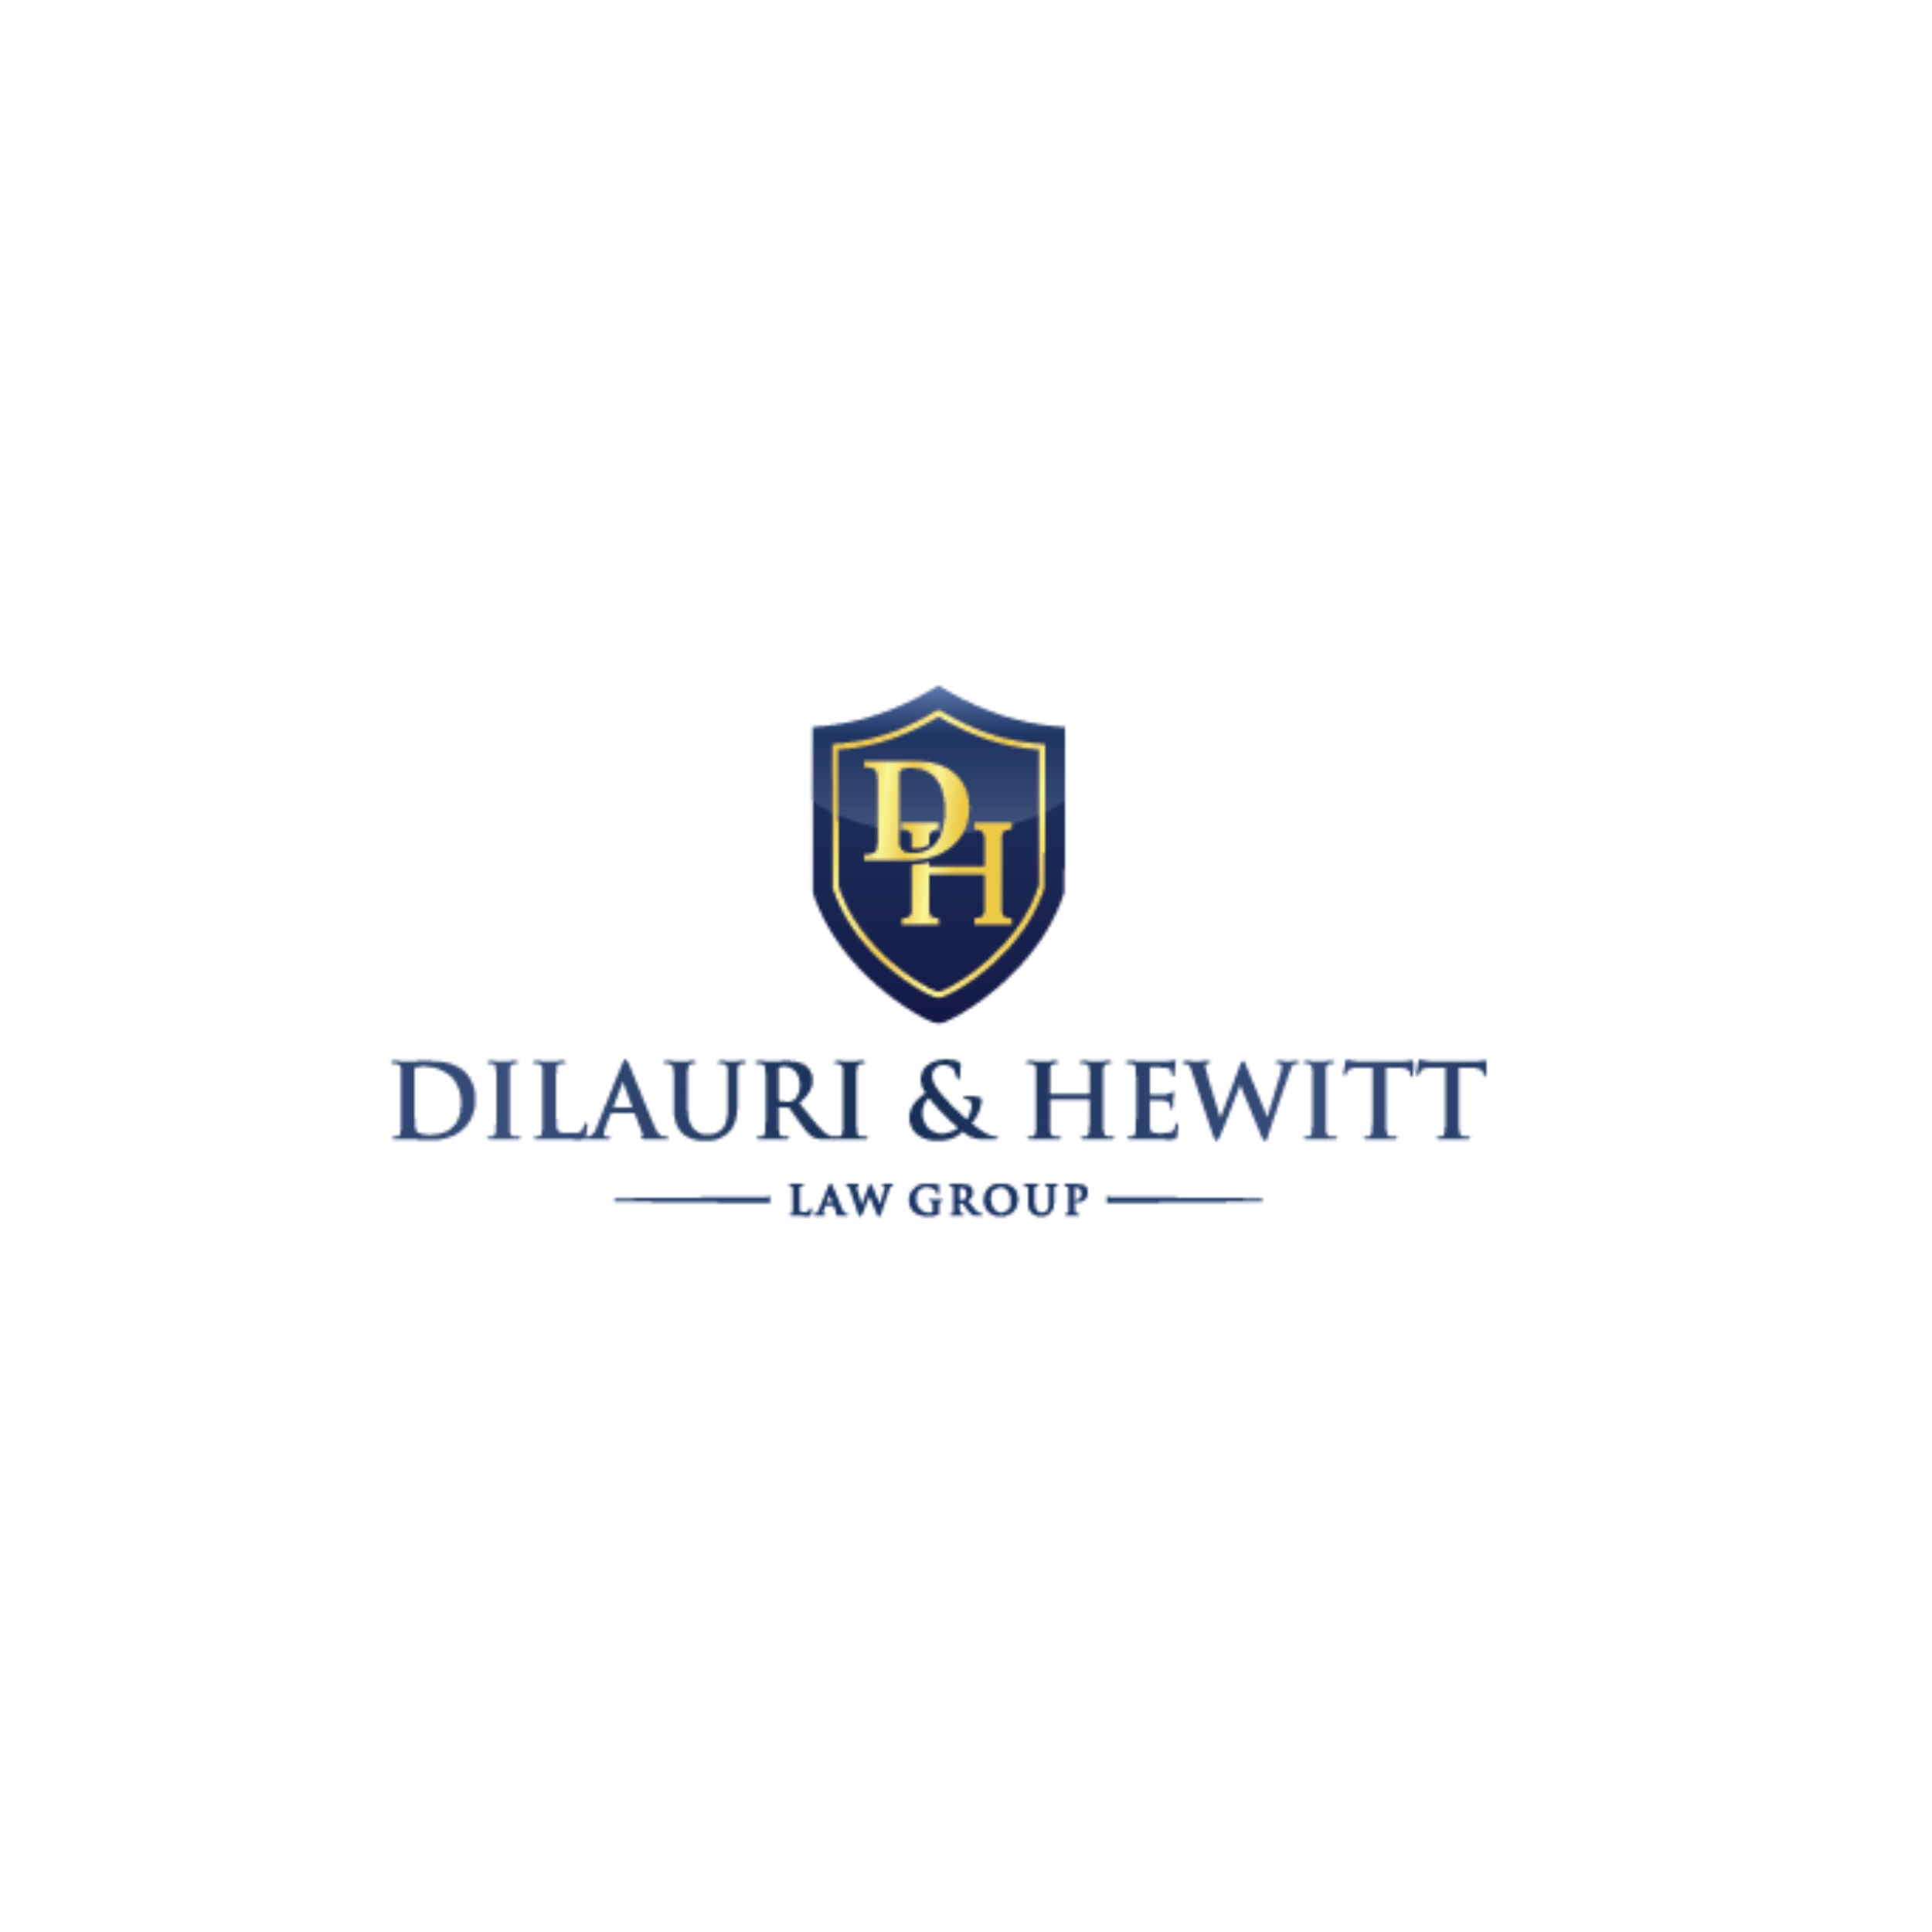 Di Lauri & Hewitt Law Group Profile Picture